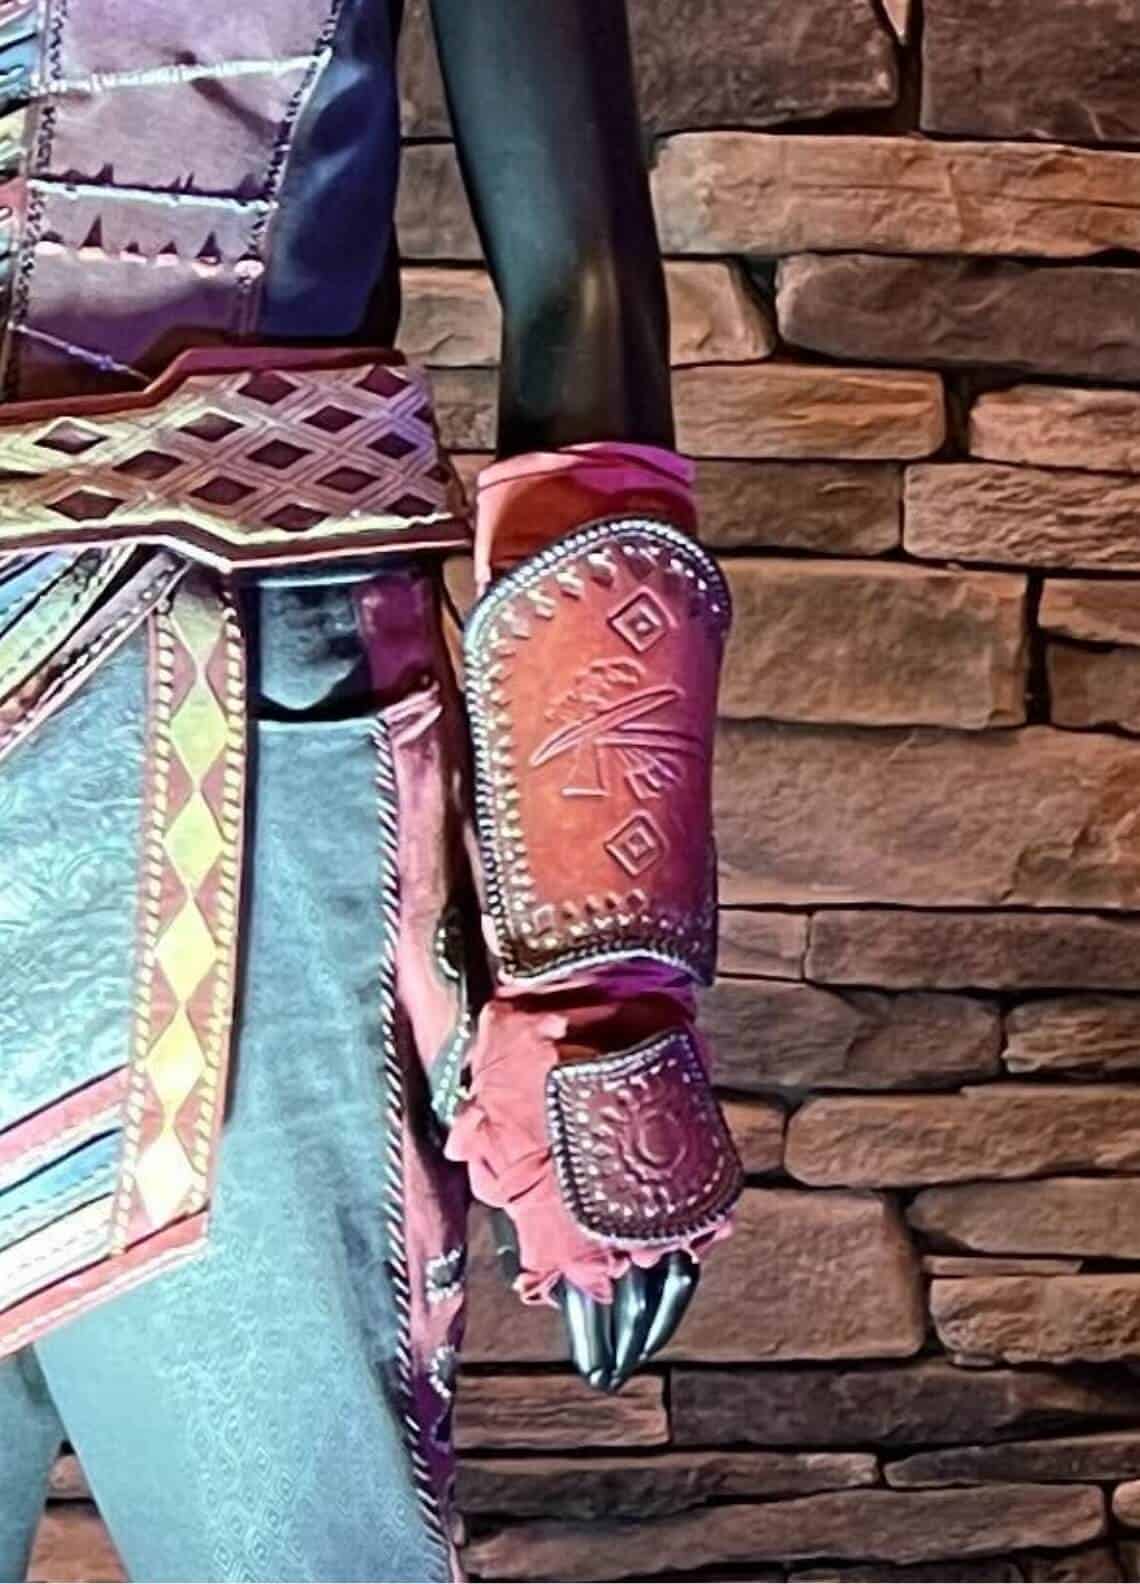 ECHO's armor with Great Seal of the Choctaw Nation of Oklahoma in the center of the wristguard